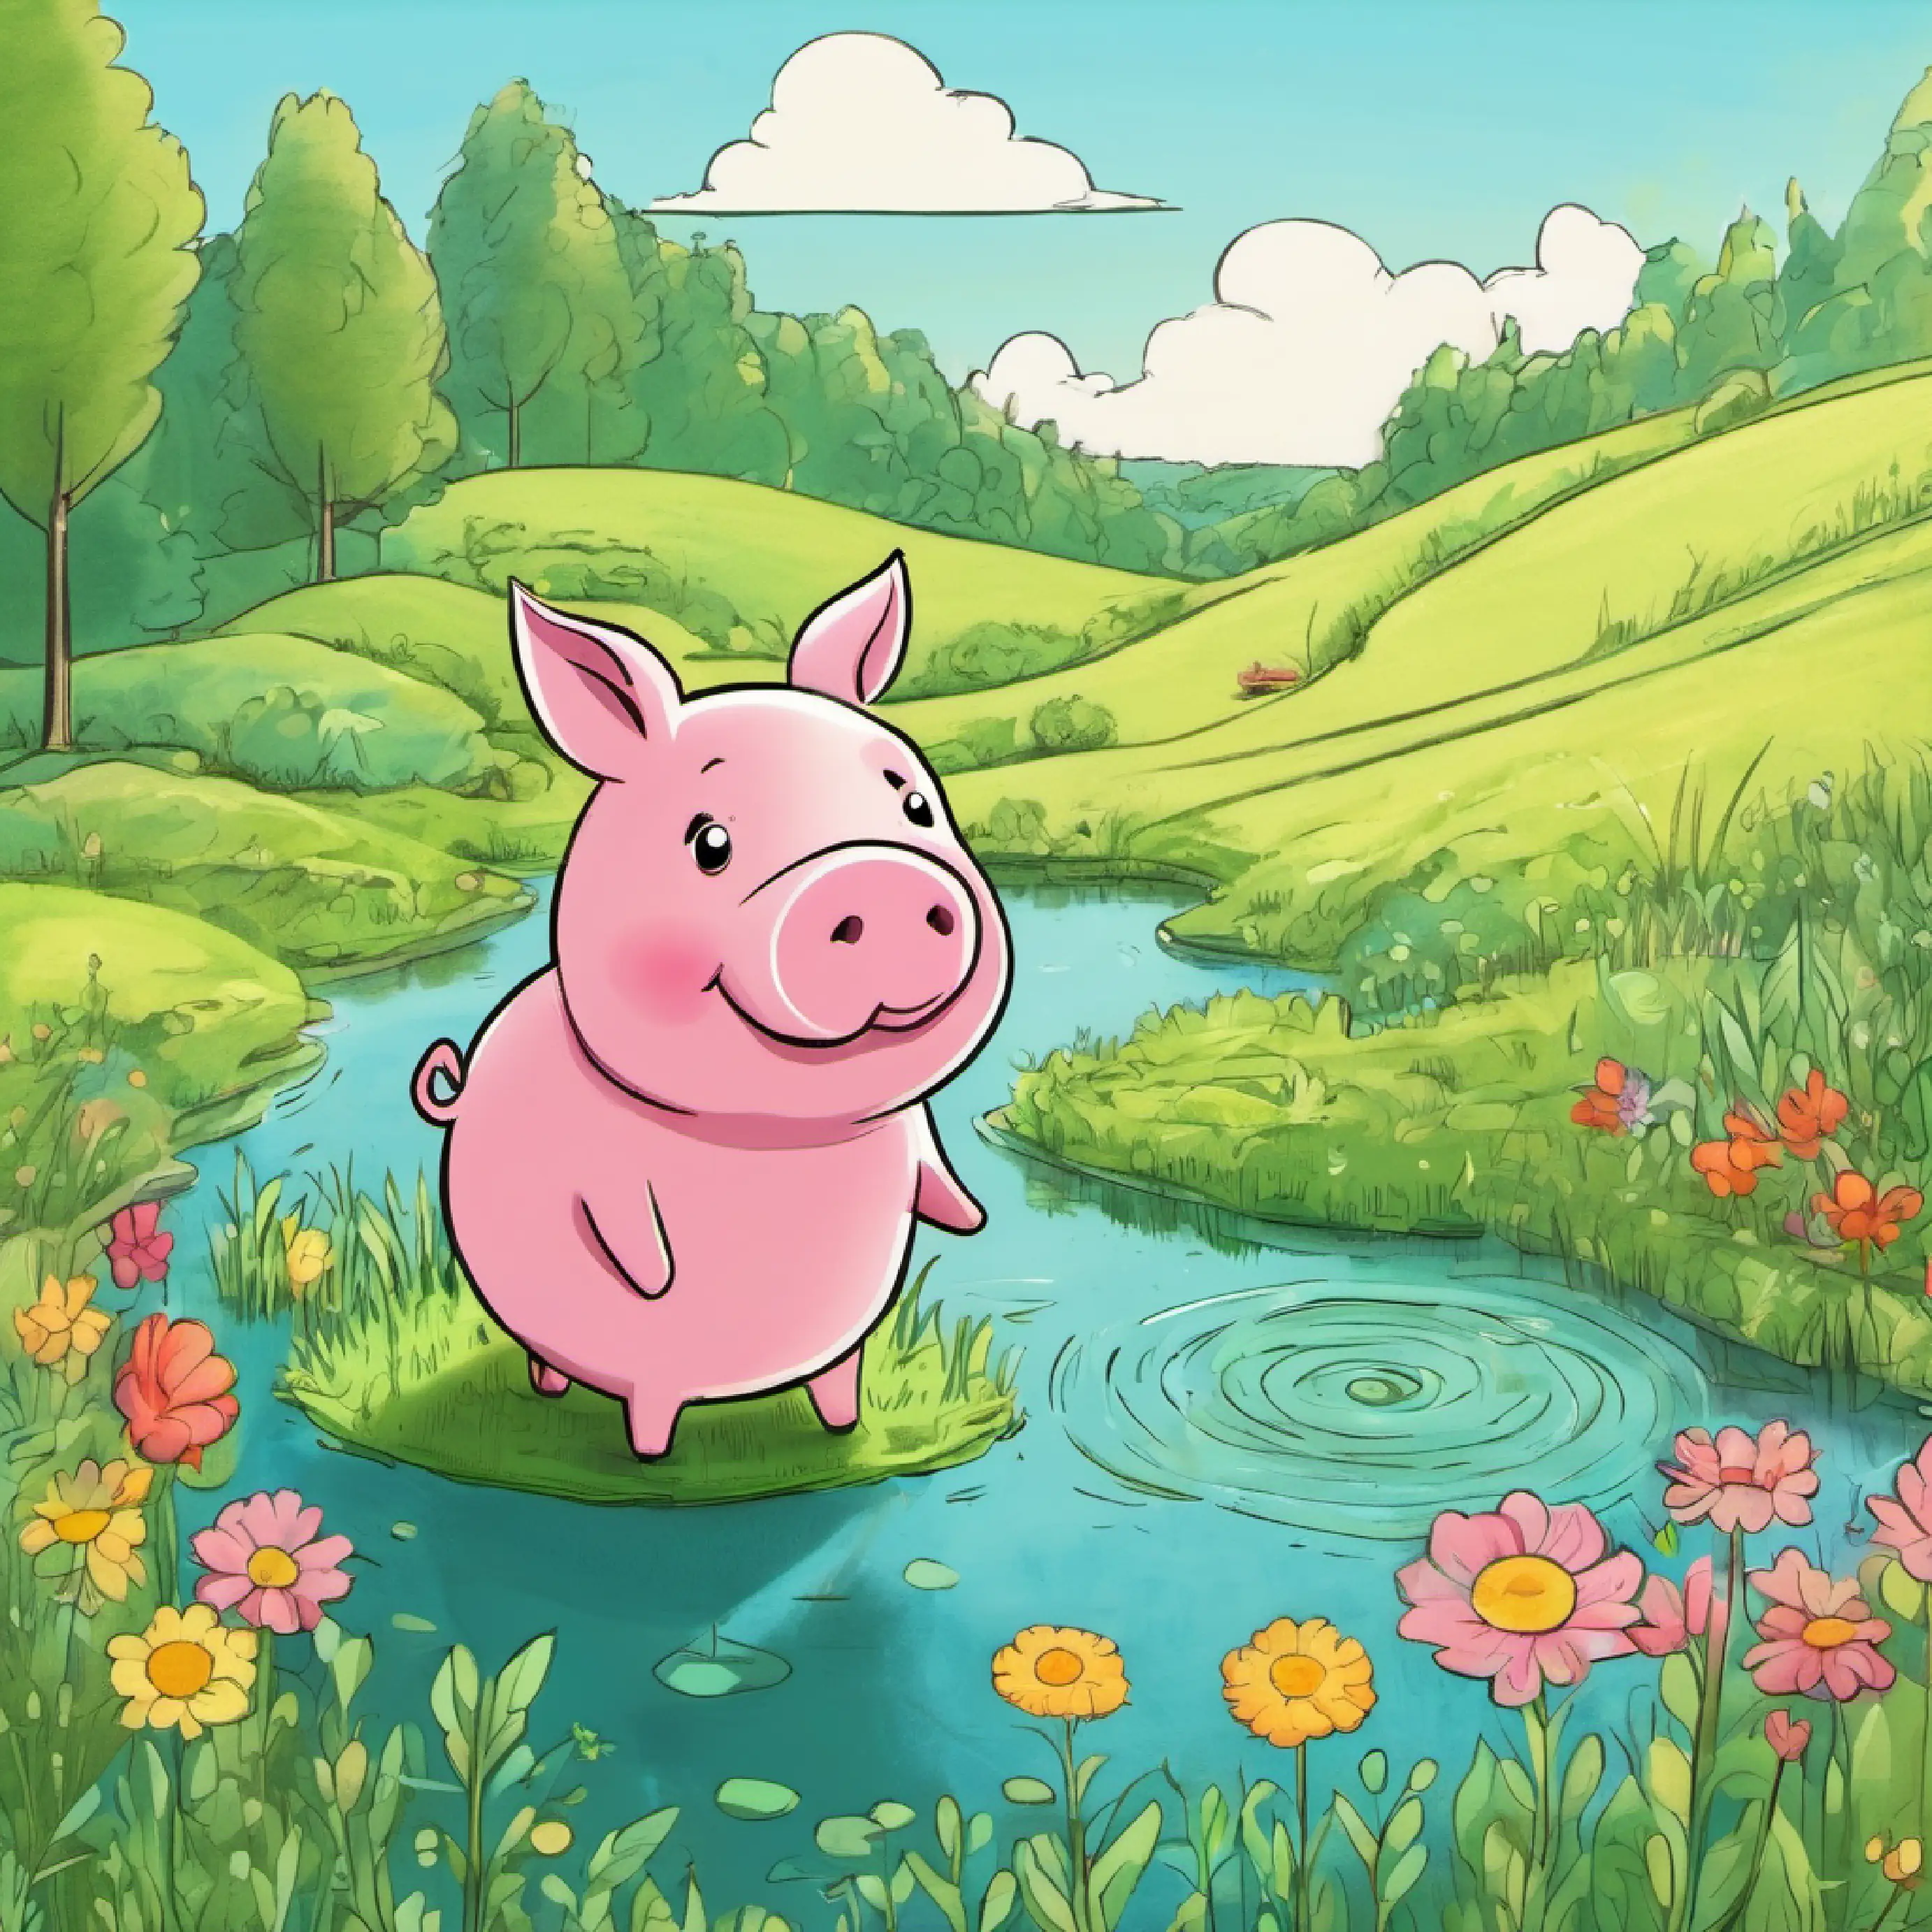 Piggy discovers a meadow and a pond.